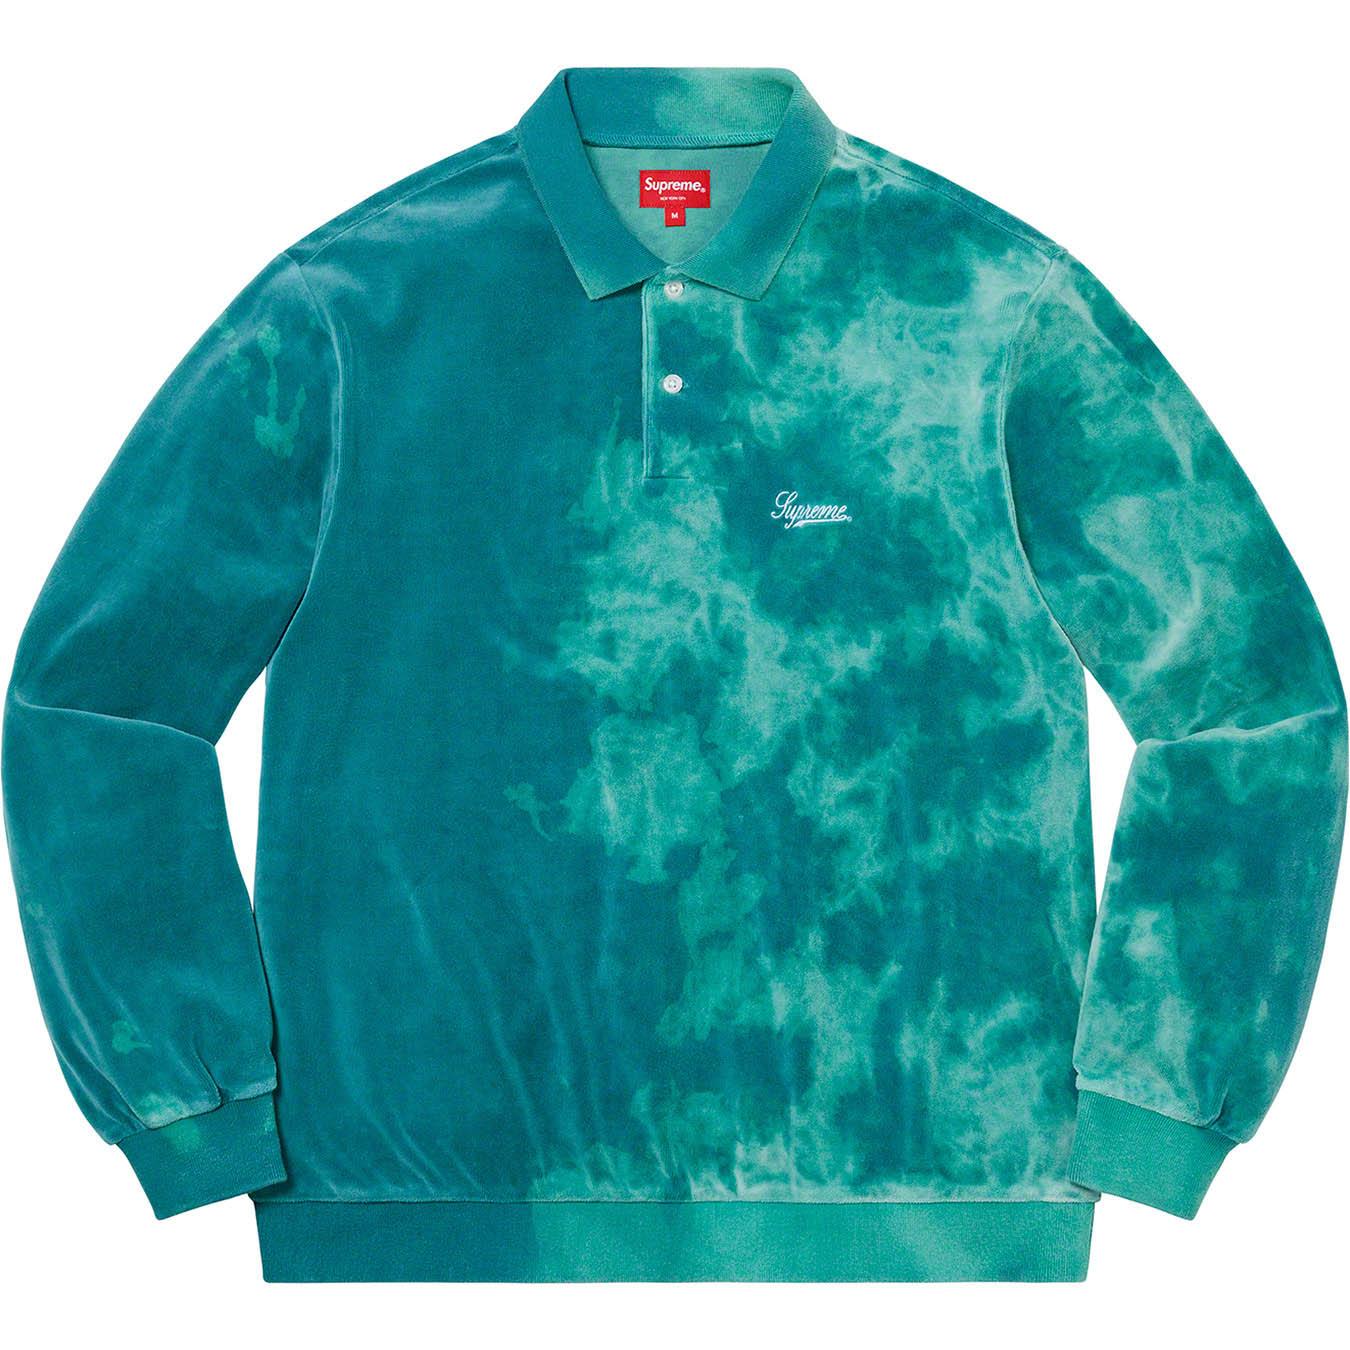 Bleached Velour L/S Polo | Supreme 21ss